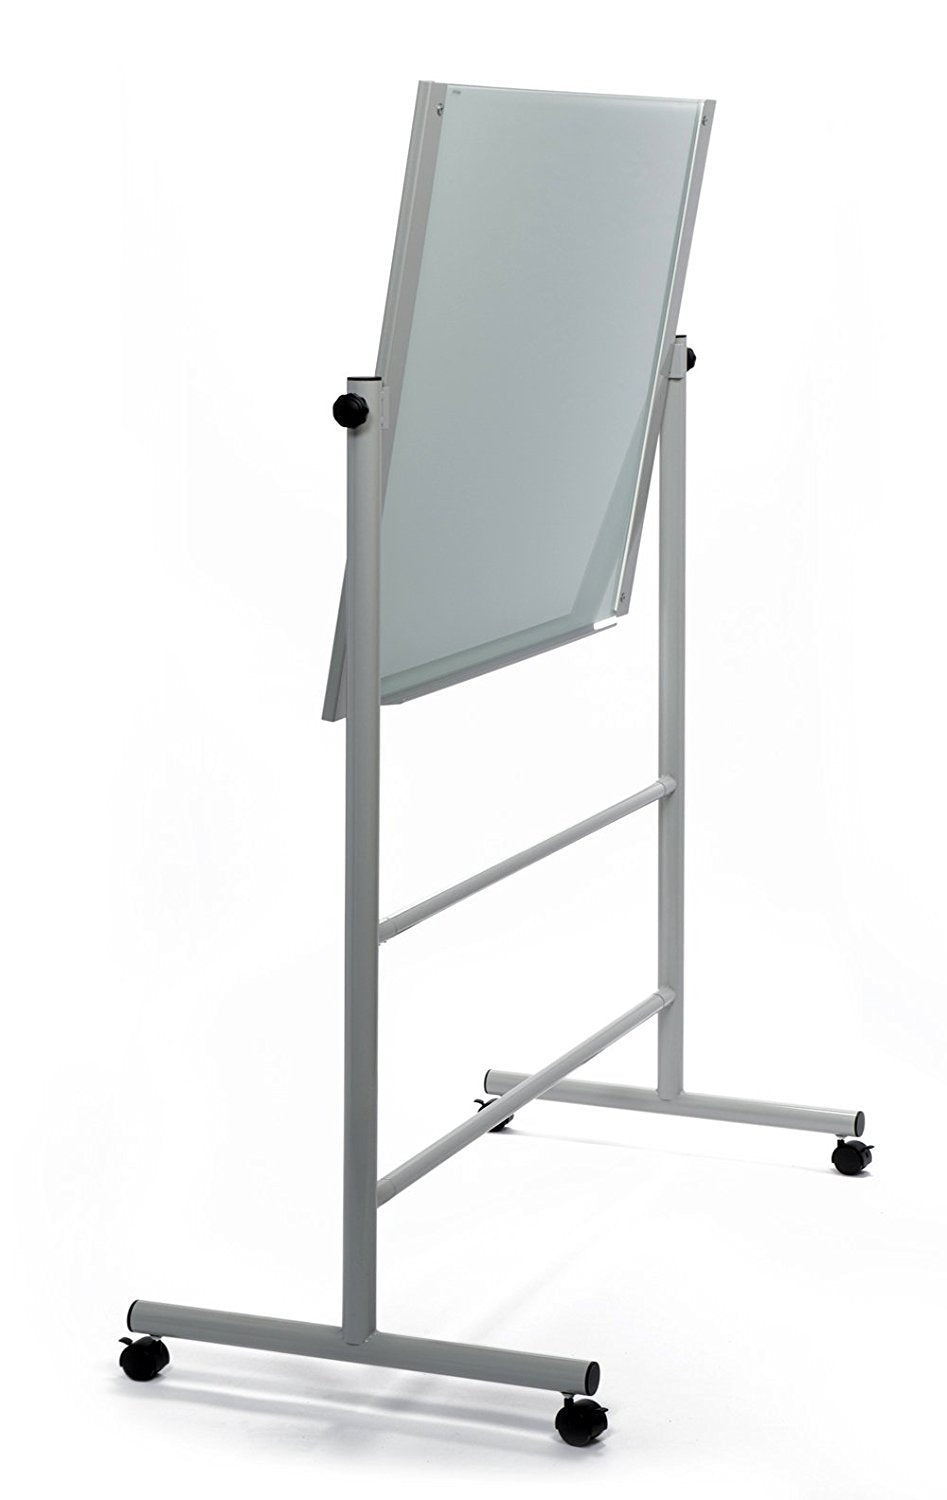 Easel Stand For Glass Dry-Erase Boards (Stand Only Does Not Include Glass Board). Locking wheels and mobile.  Shown at an angle for example of use. 